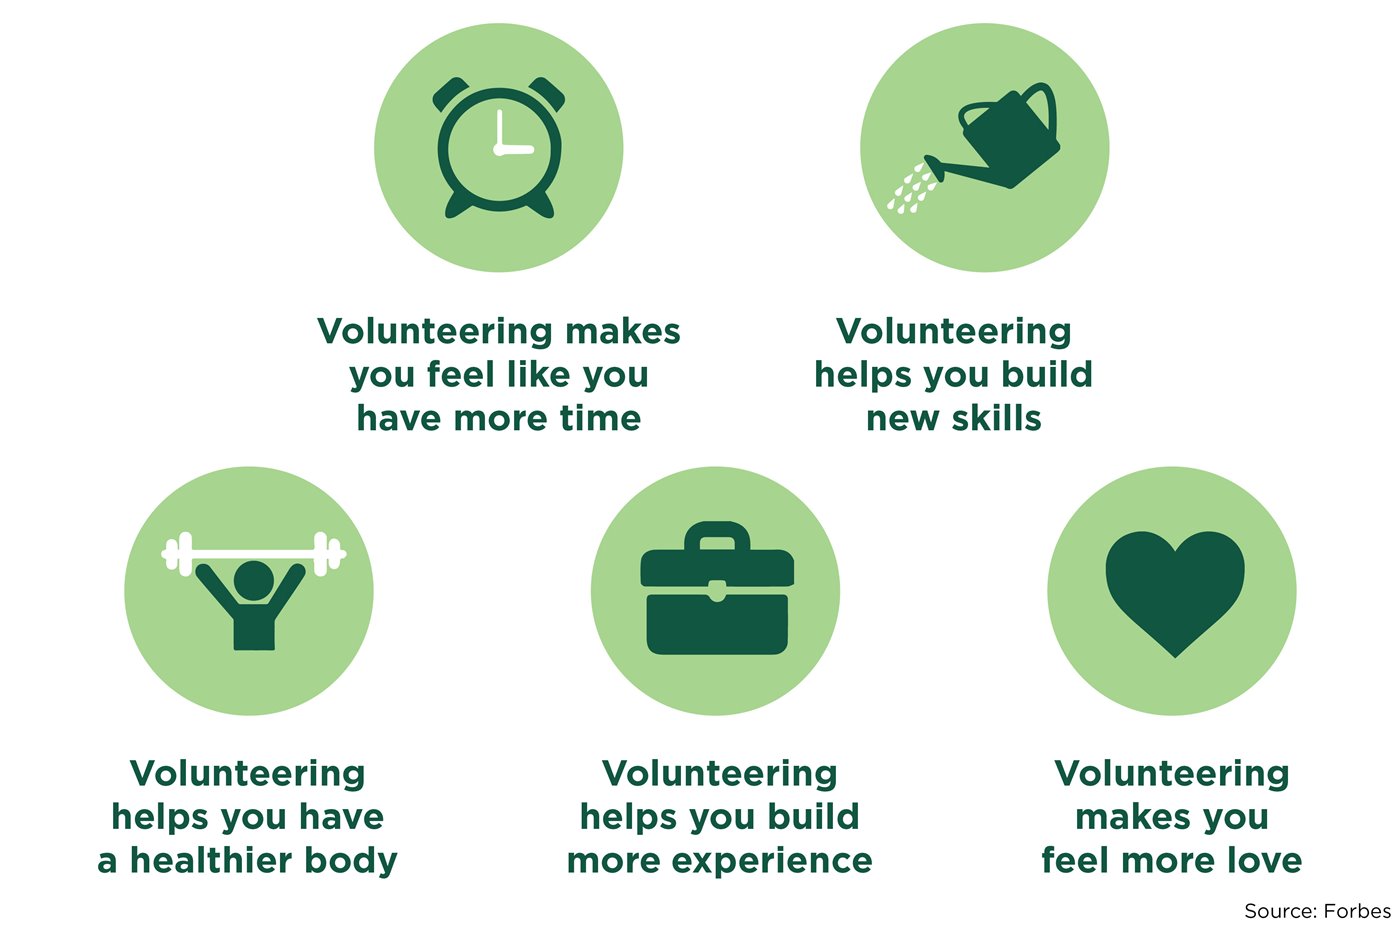 An infographic describing the five surprising benefits of volunteering, derived from a Forbes article